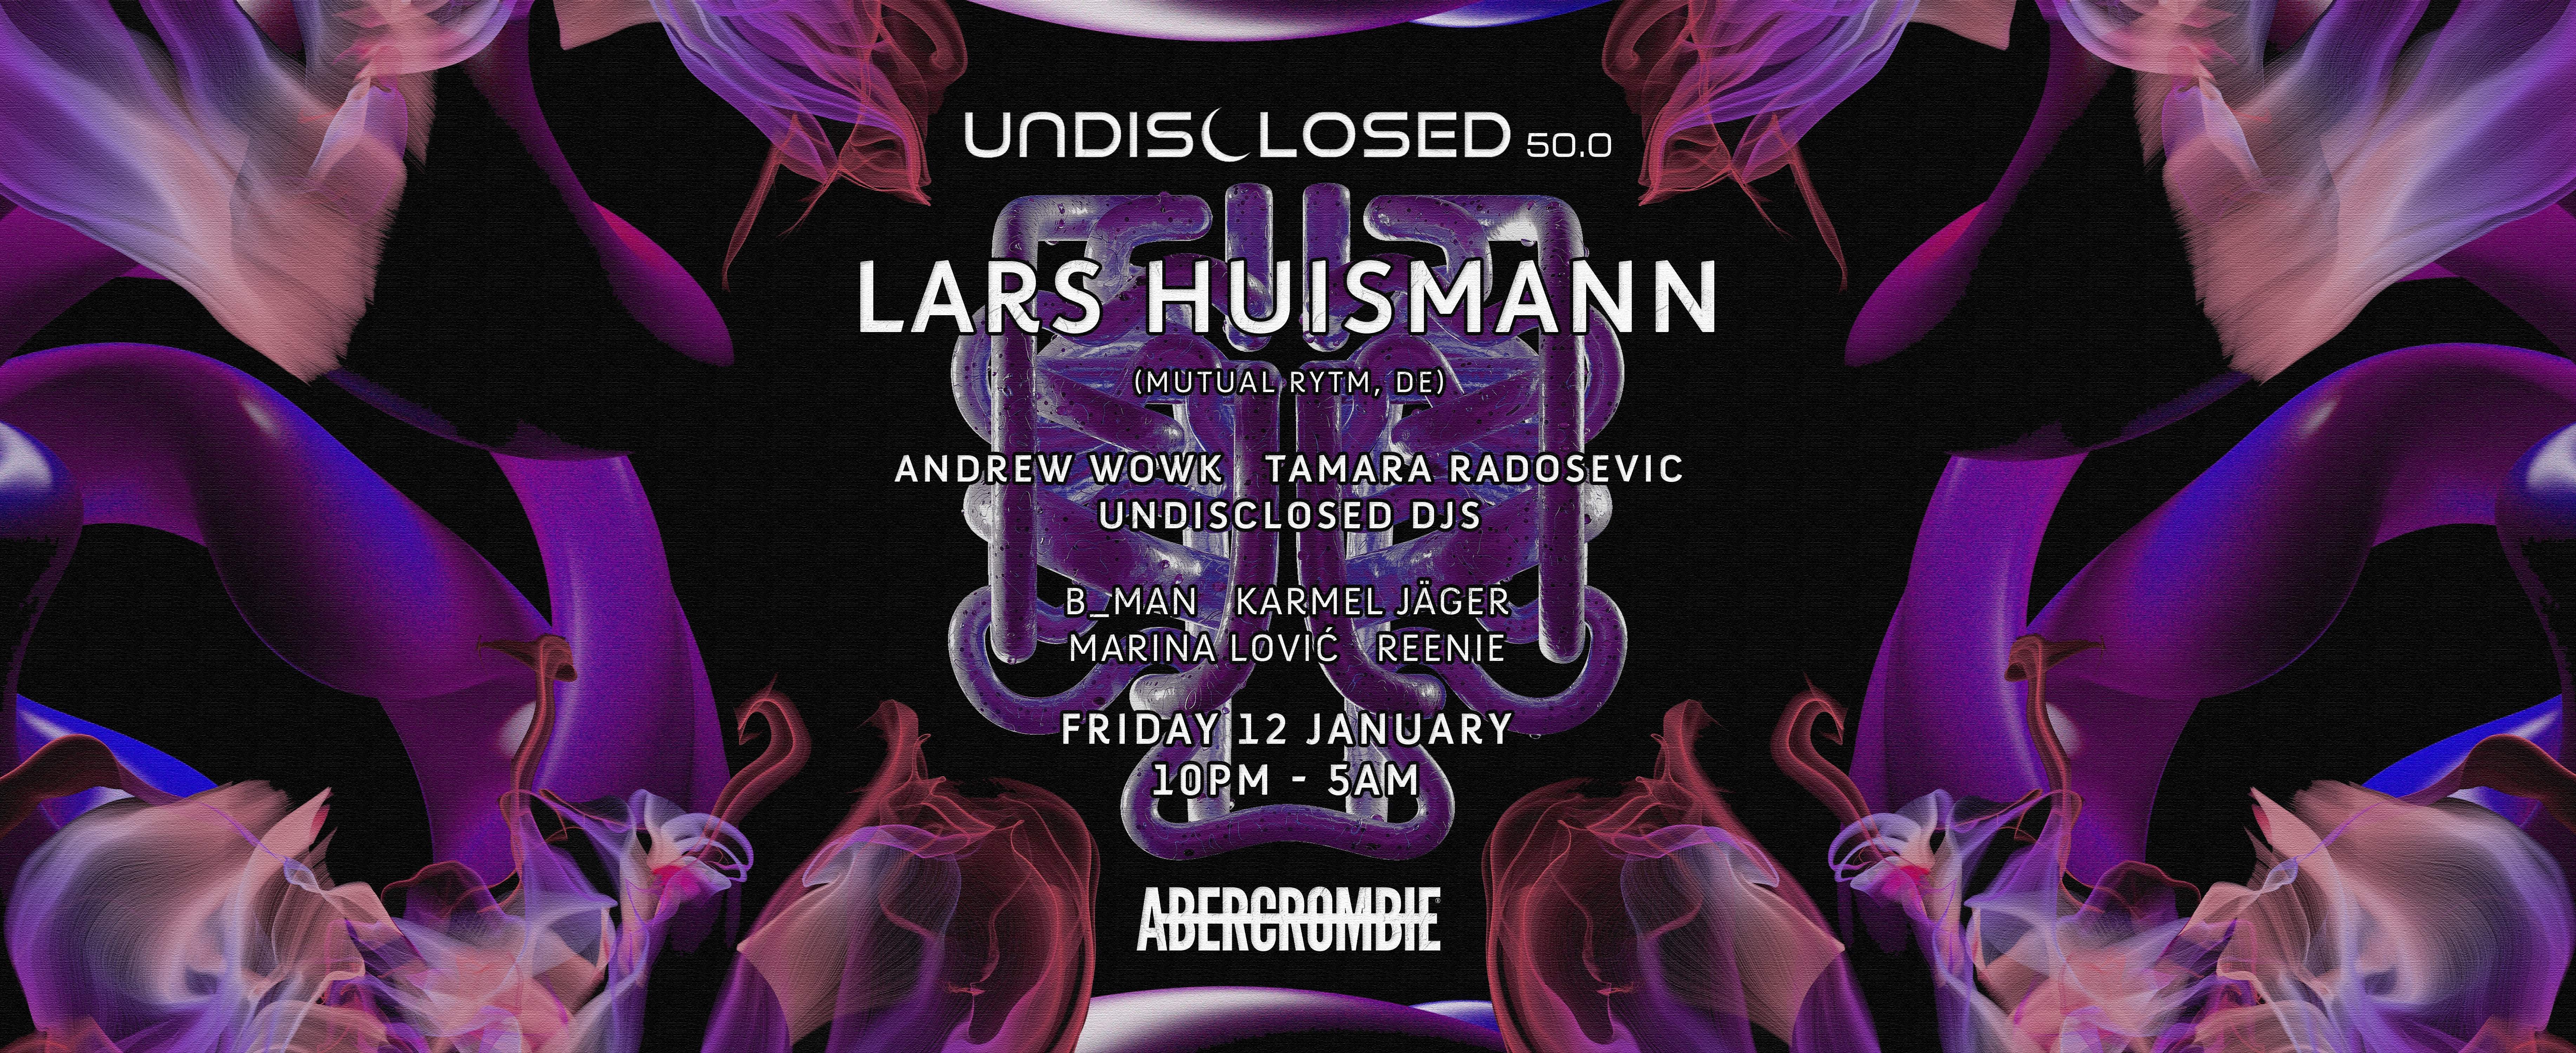 UNDISCLOSED 50.0 with Lars Huismann - フライヤー表